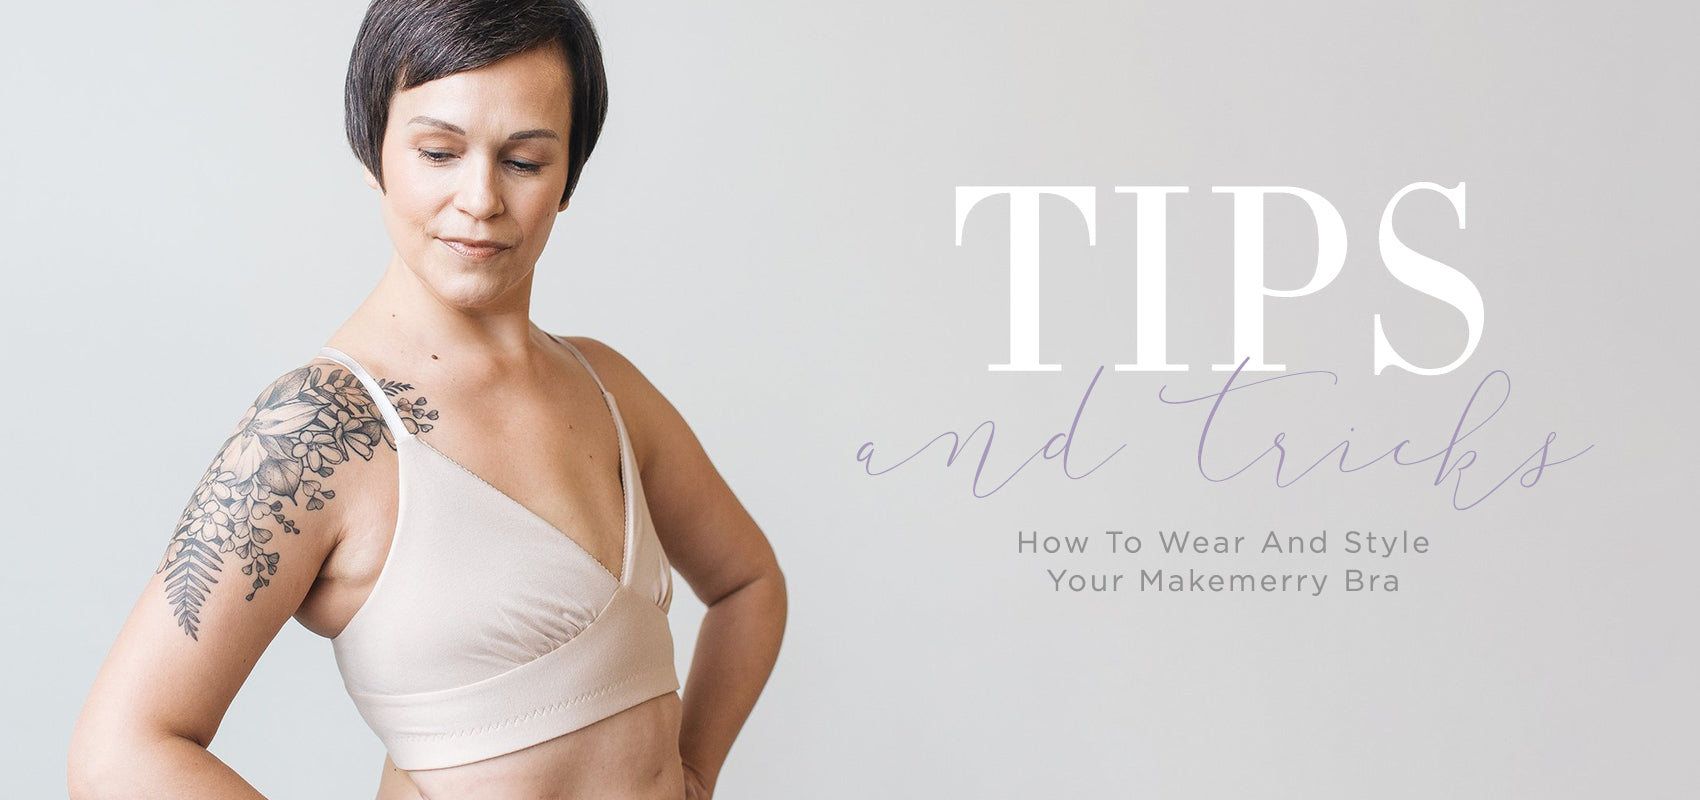 Tips & Tricks: How To Wear And Style Your Makemerry Bra